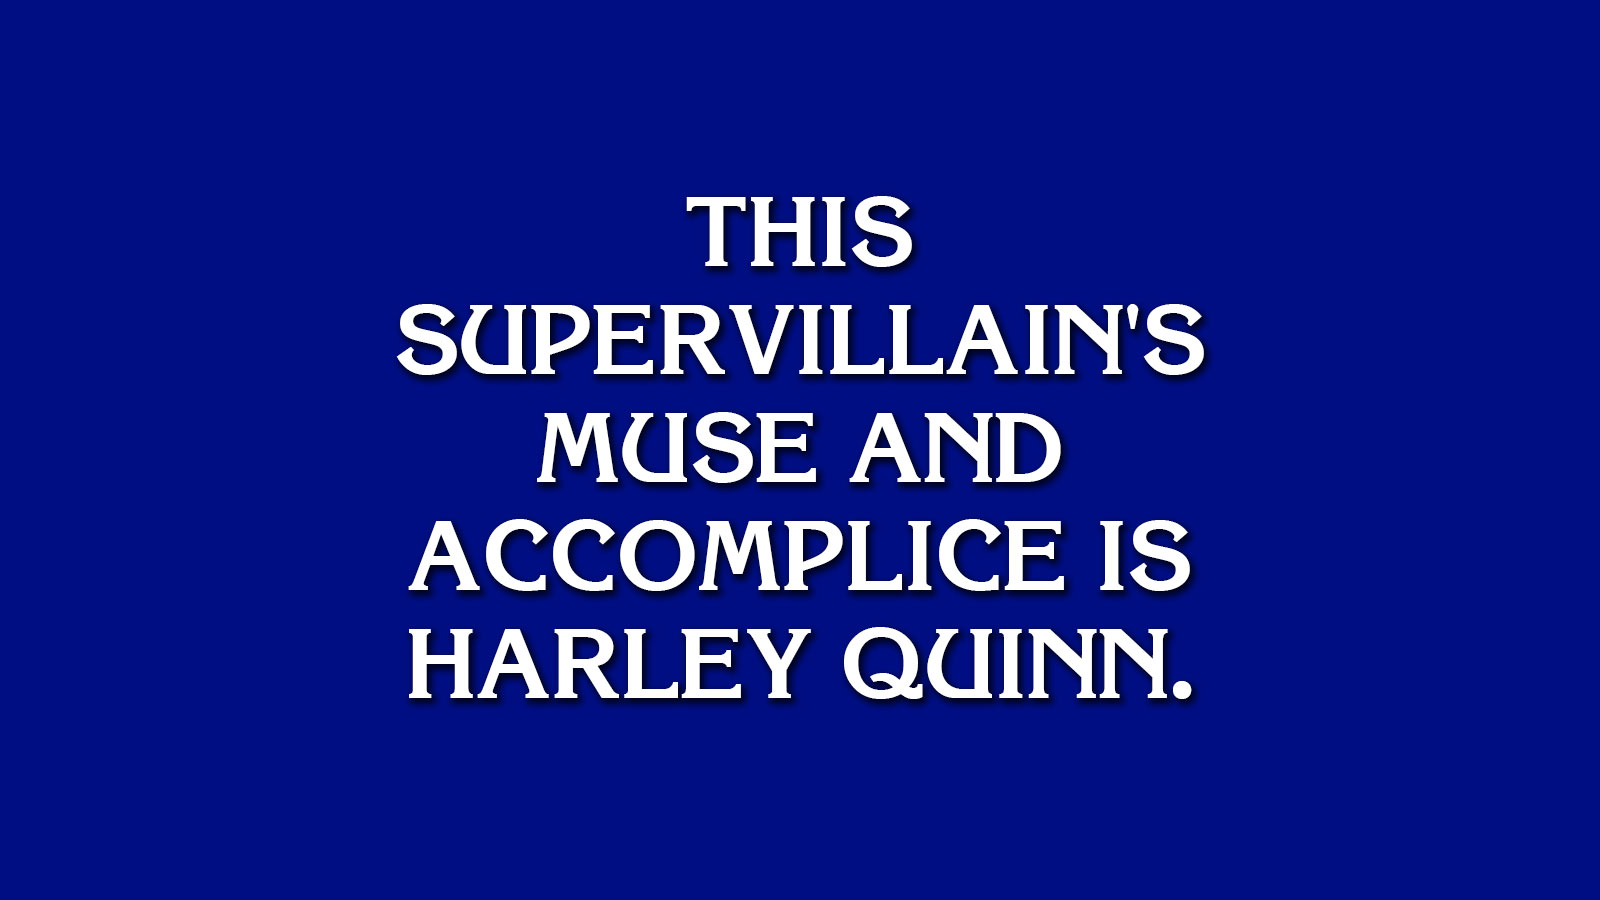 Can You Beat an Easy Game of “Jeopardy!”? 616